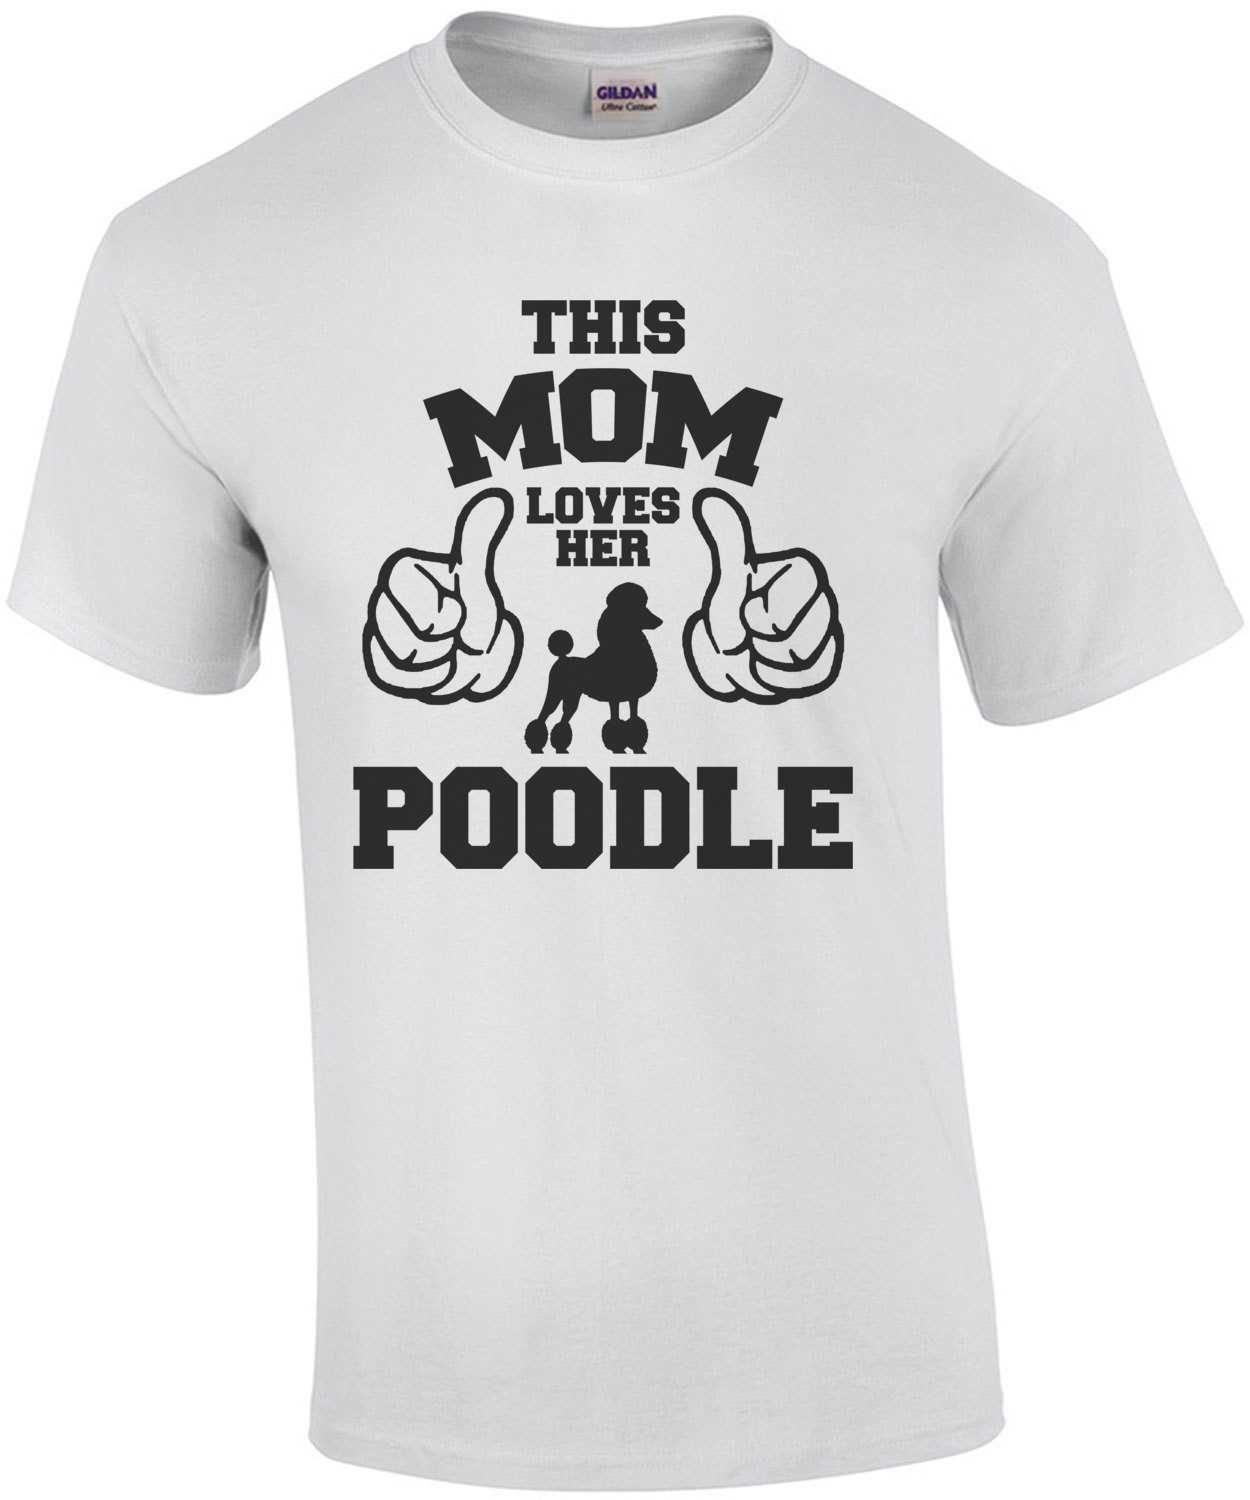 This Mom Loves Her Poodle T-Shirt